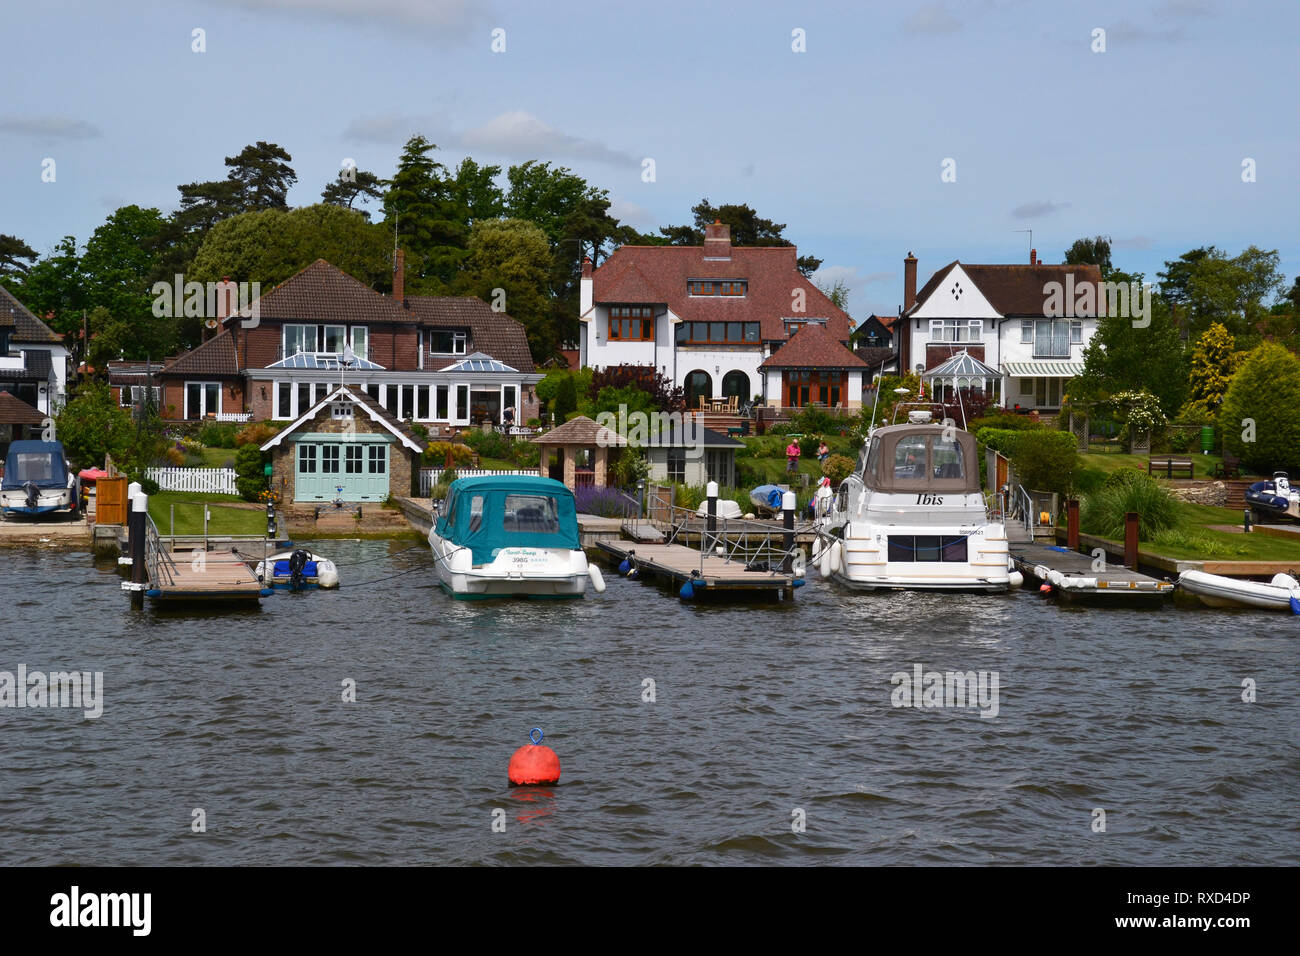 Houses on the riverside near Oulton Broad, Suffolk, UK Stock Photo